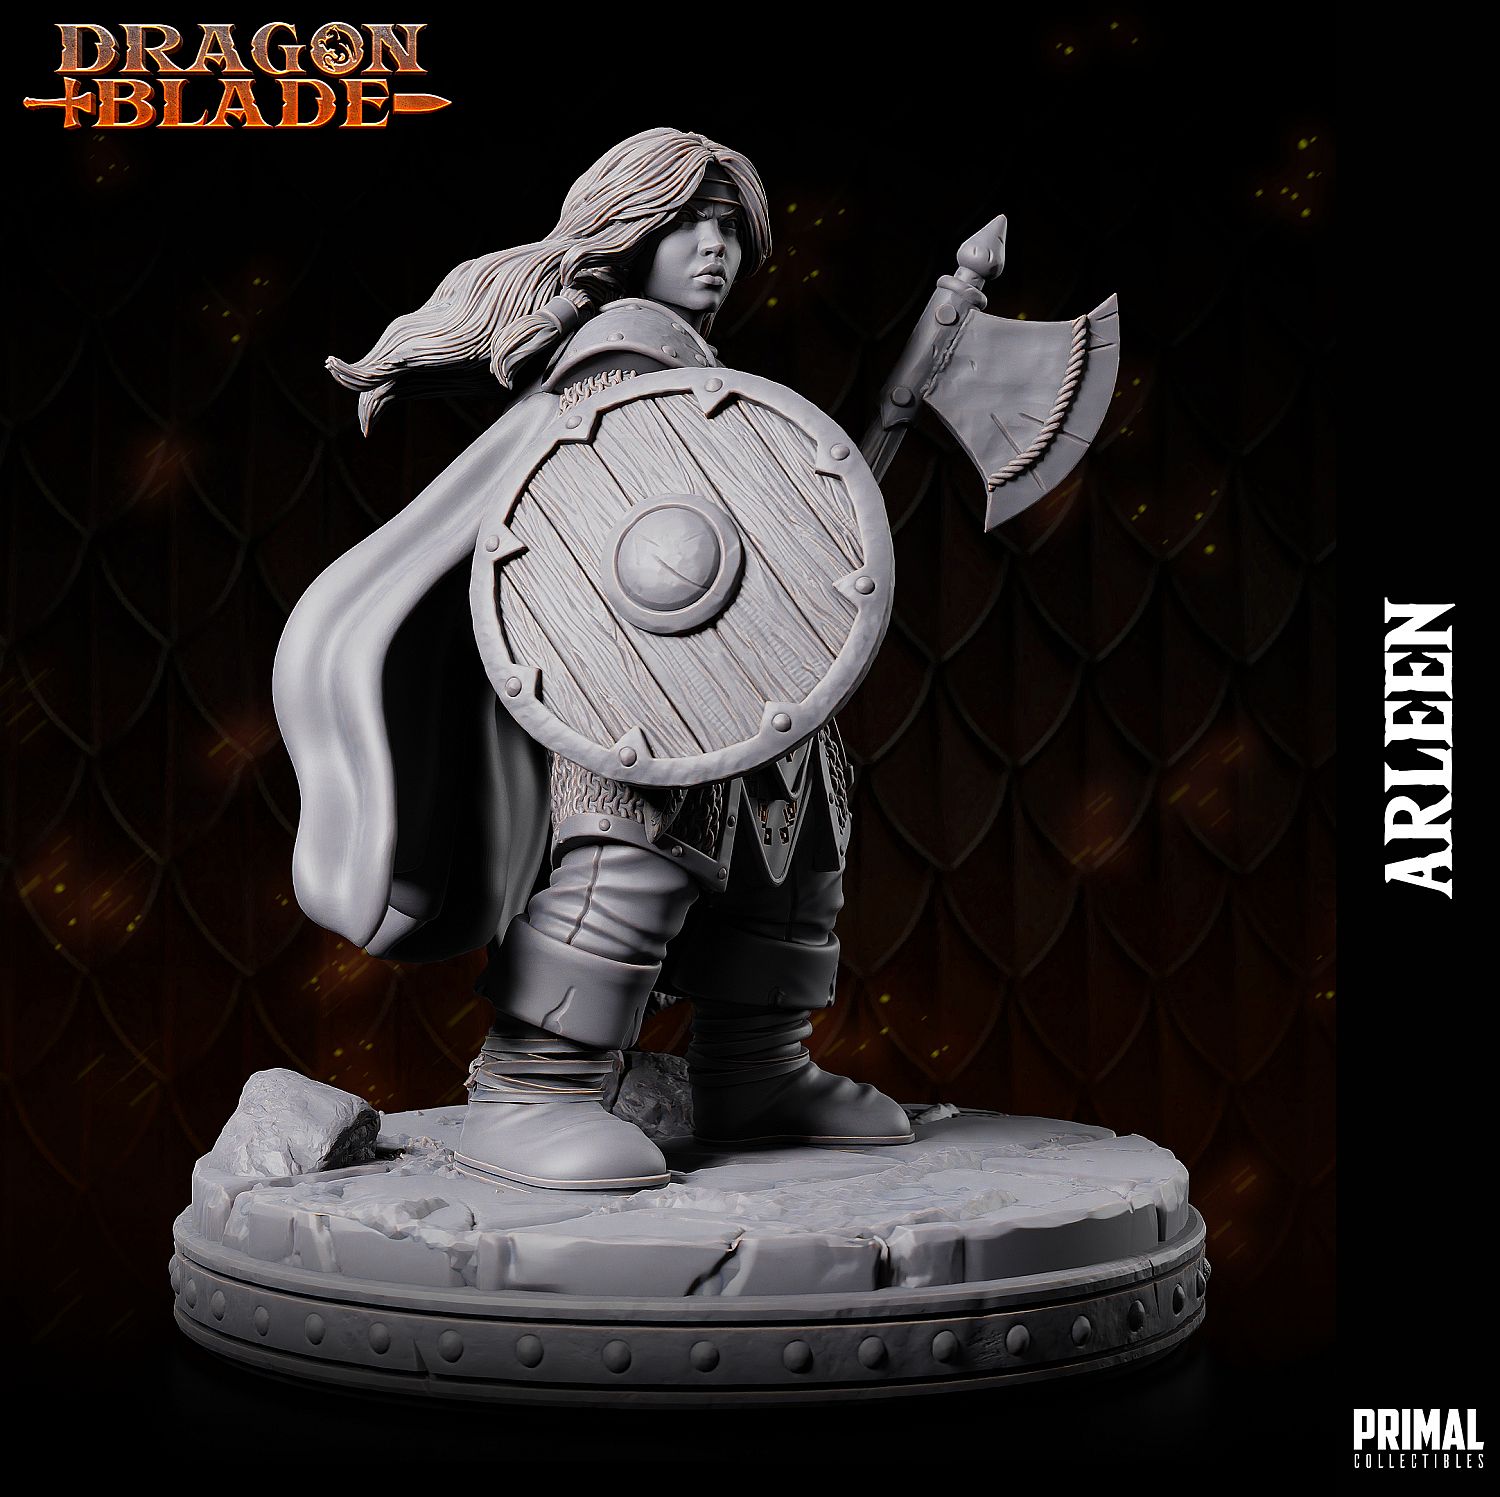 Elf- Ordella - June 2023 - DRAGONBLADE- MASTERS OF DUNGEONS QUEST - Primal  Collectibles - Miniatures by